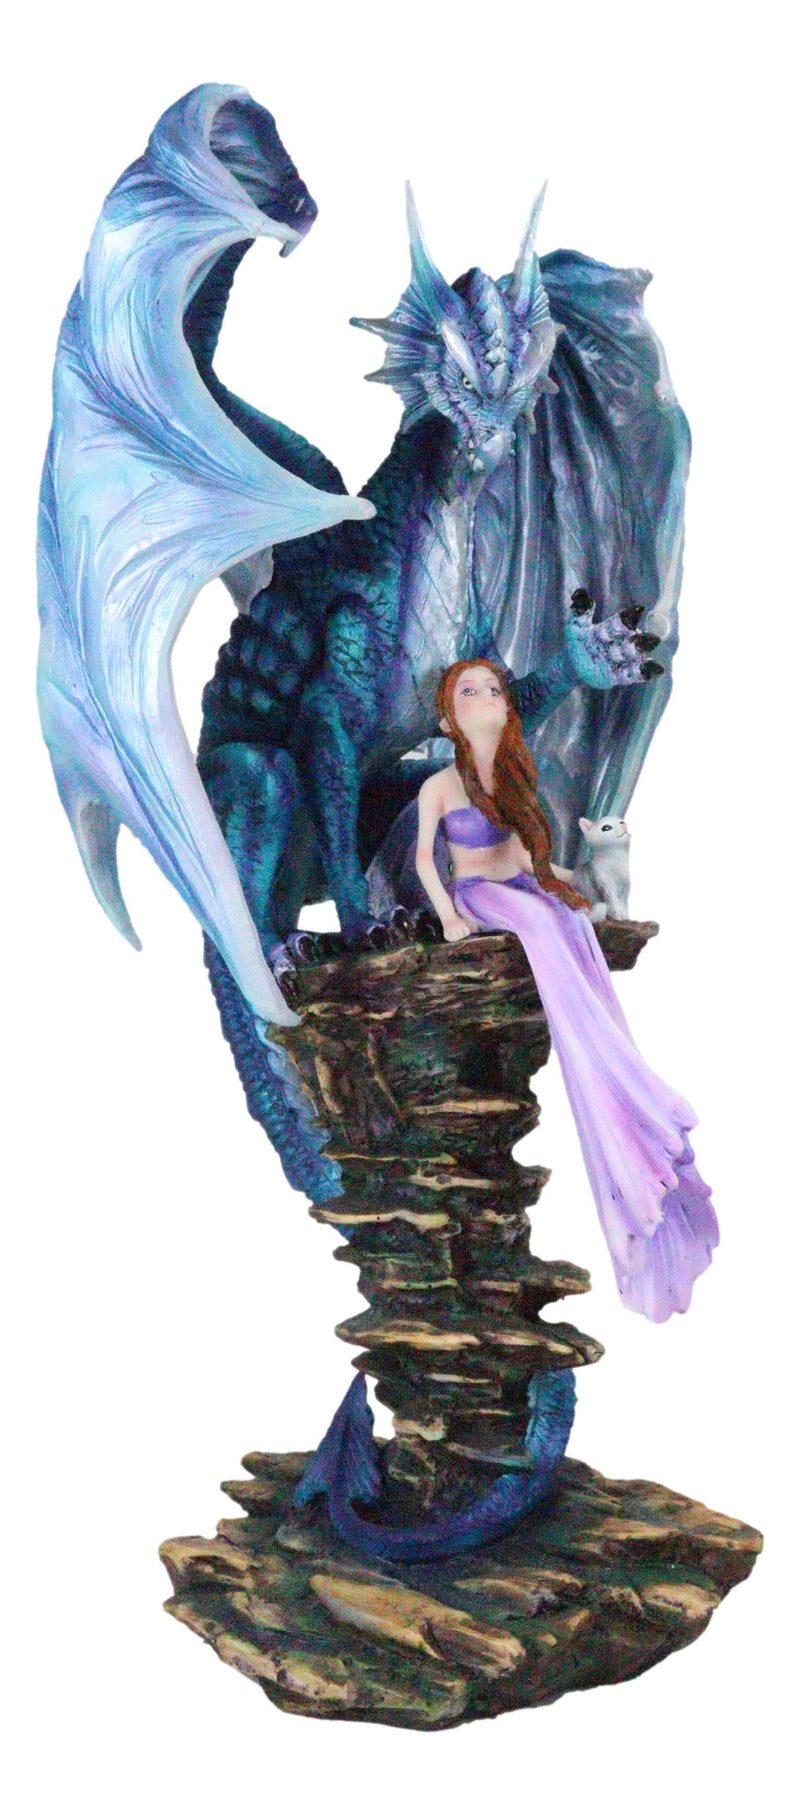 Giant Leviathan Blue Dragon Protecting A Young Princess Fairy With Kitten Statue